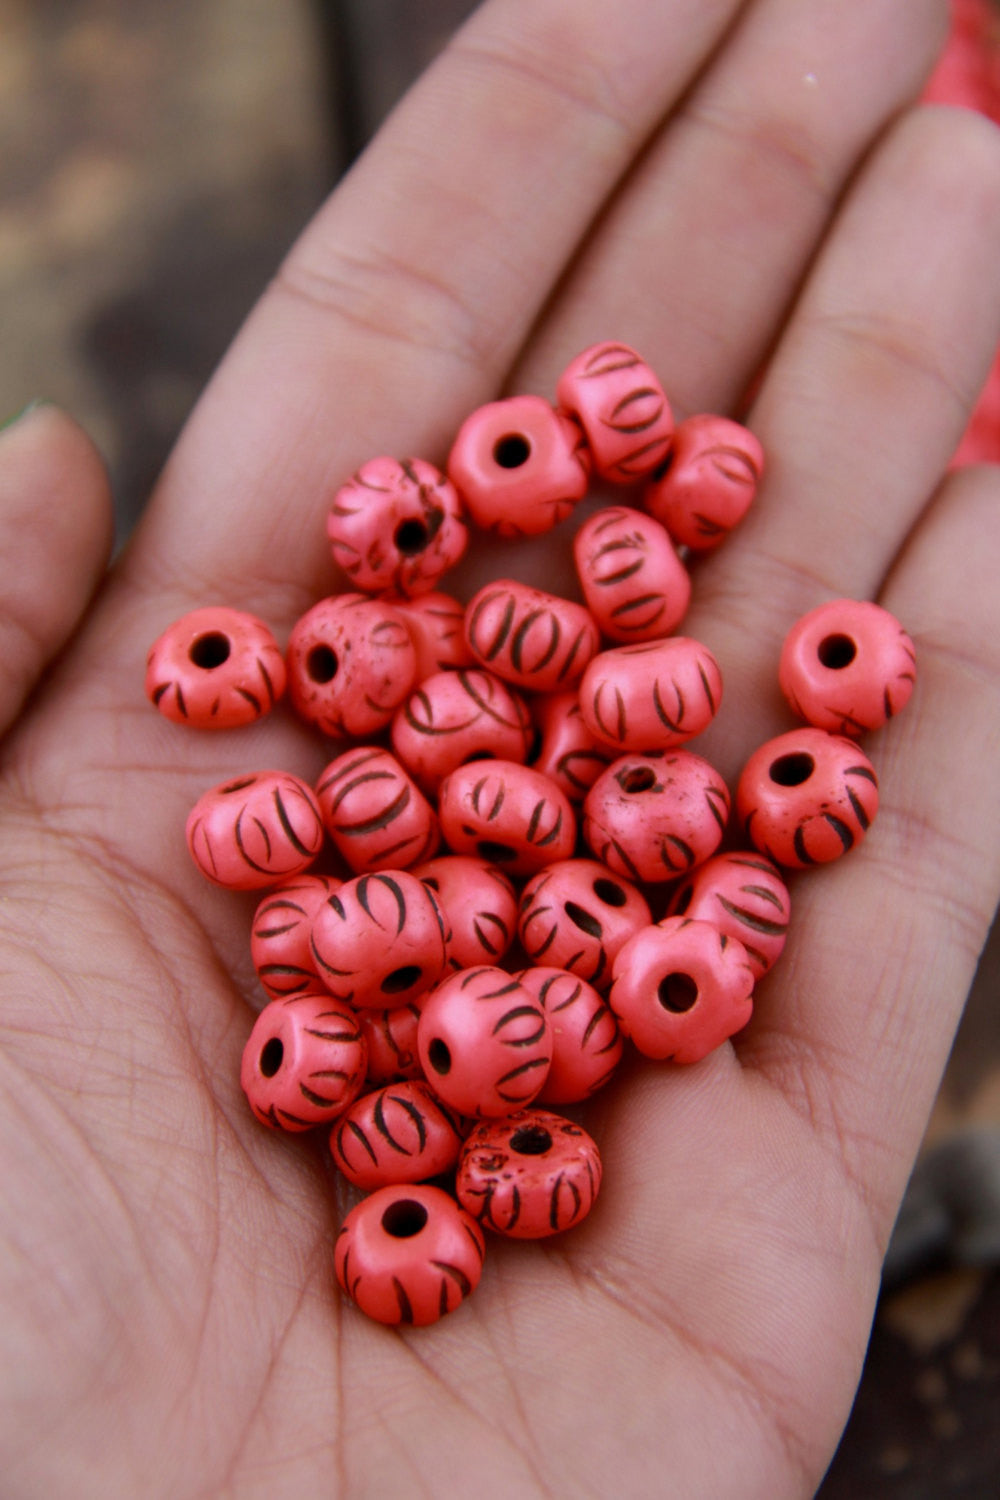 Grooved Salmon Tribal Loops: Carved Bone Beads, 9x7mm, 30 pieces - ShopWomanShopsWorld.com. Bone Beads, Tassels, Pom Poms, African Beads.